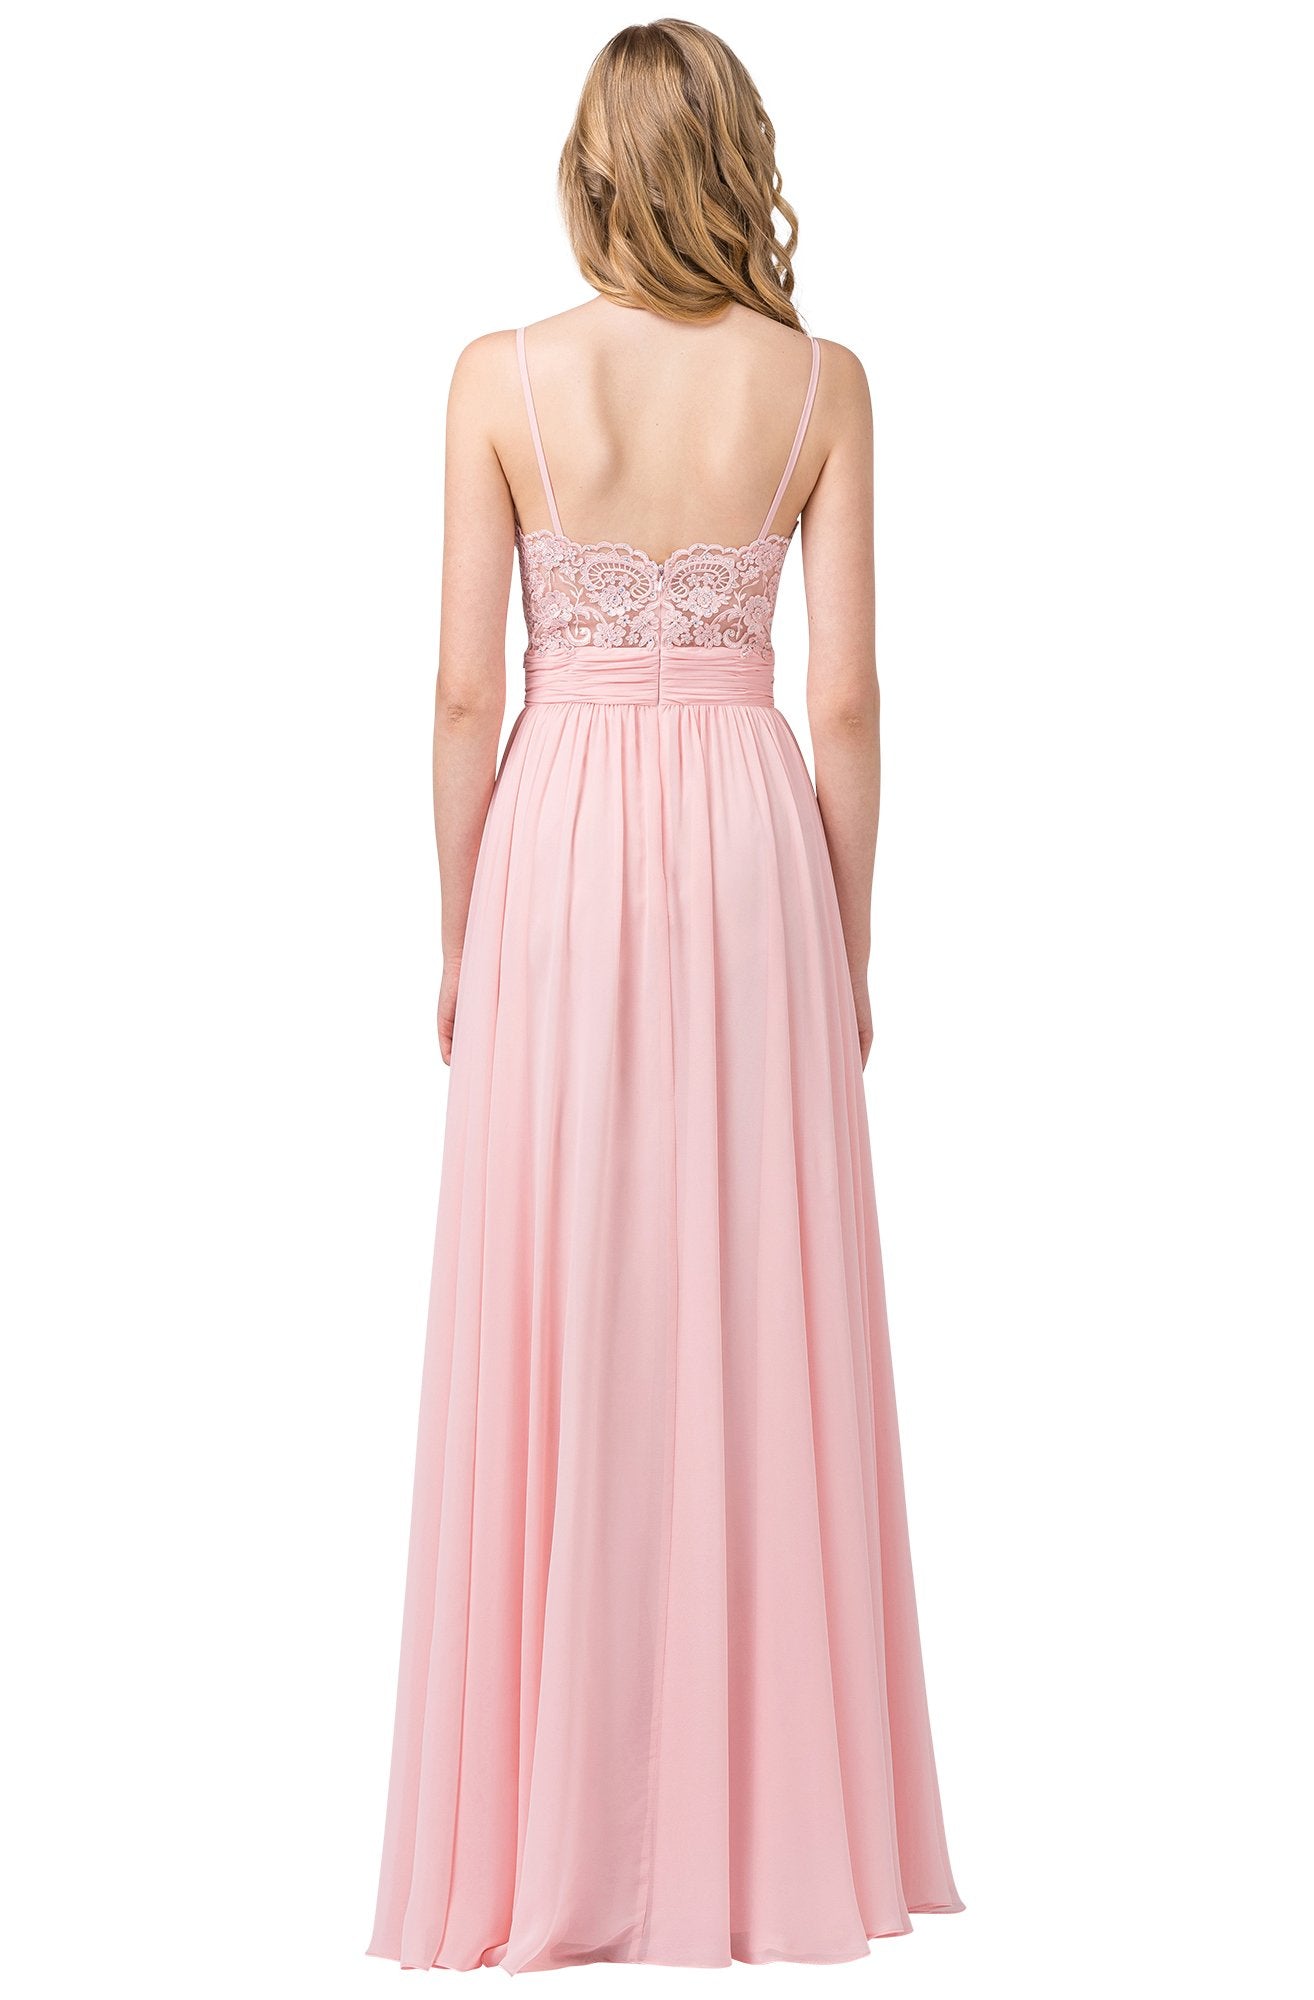 Dancing Queen - 2789 Beaded Lace Embroidery Square Neck A-Line Gown In Pink